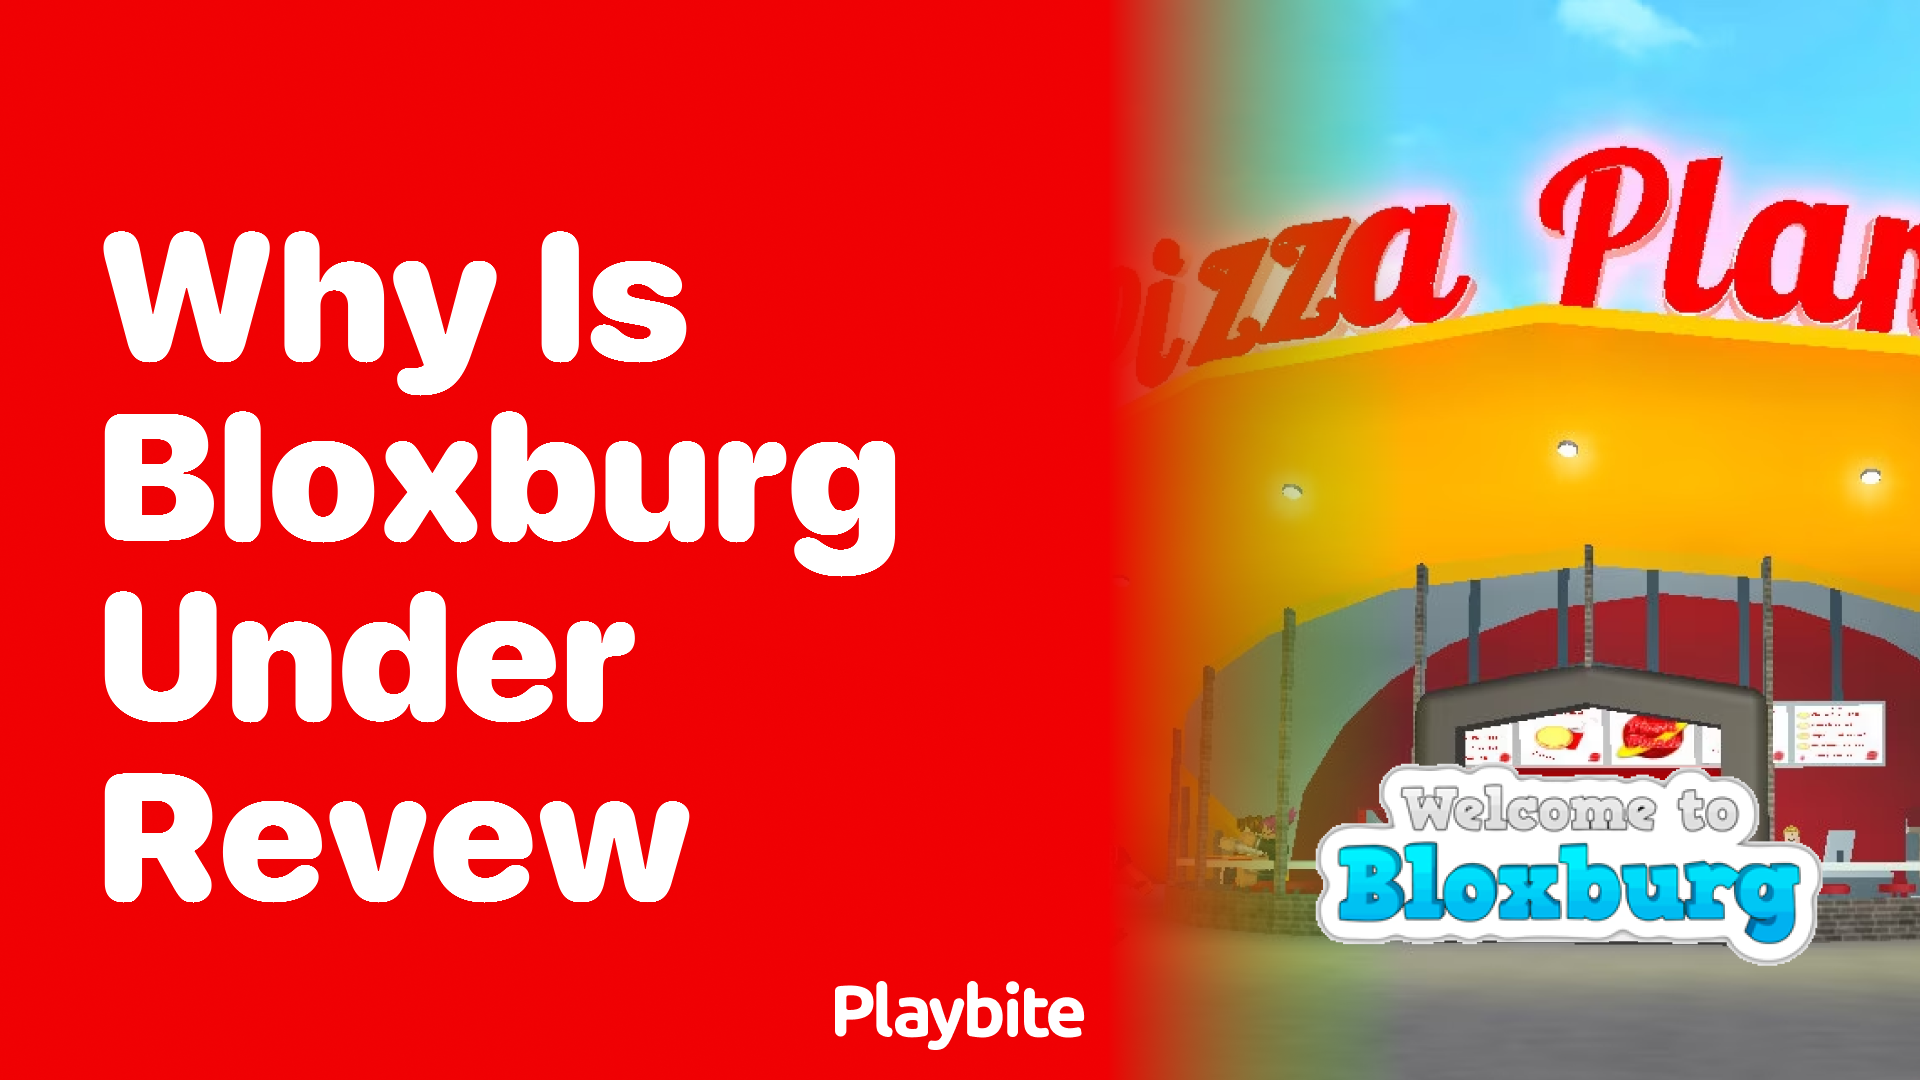 Why is Bloxburg Under Review?